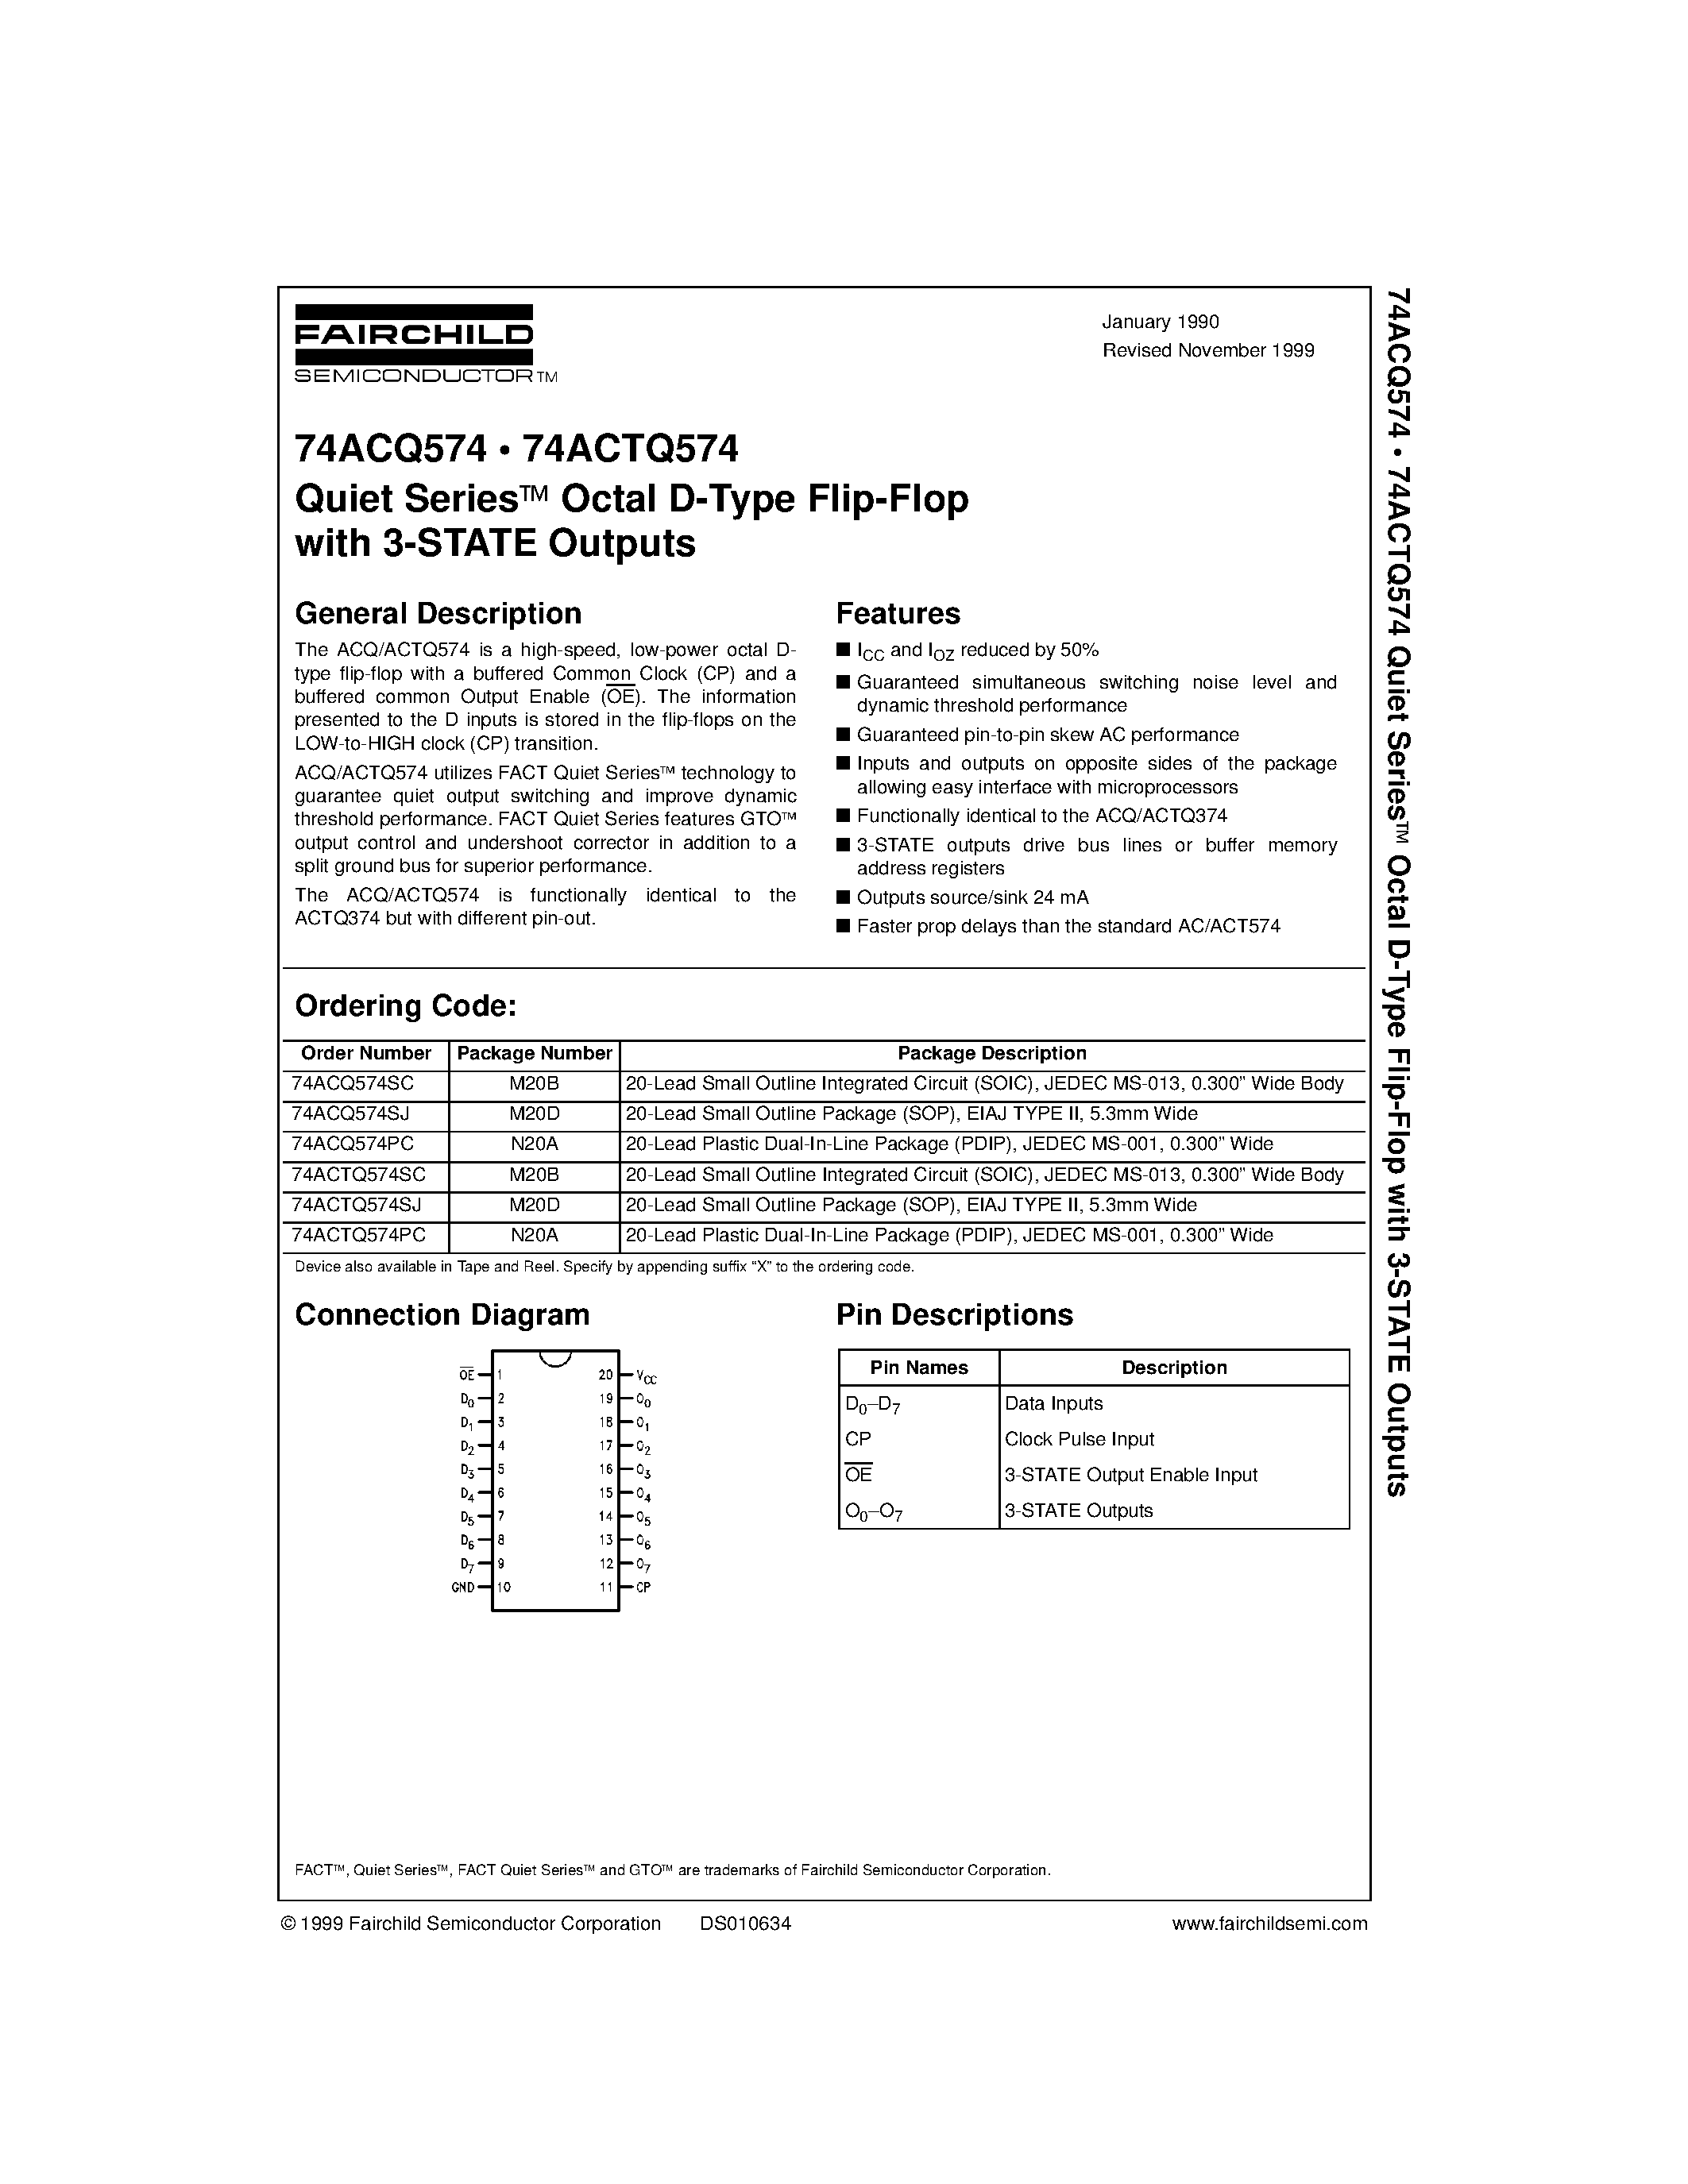 Datasheet 74ACTQ574SC - Quiet Series Octal D-Type Flip-Flop with 3-STATE Outputs page 1